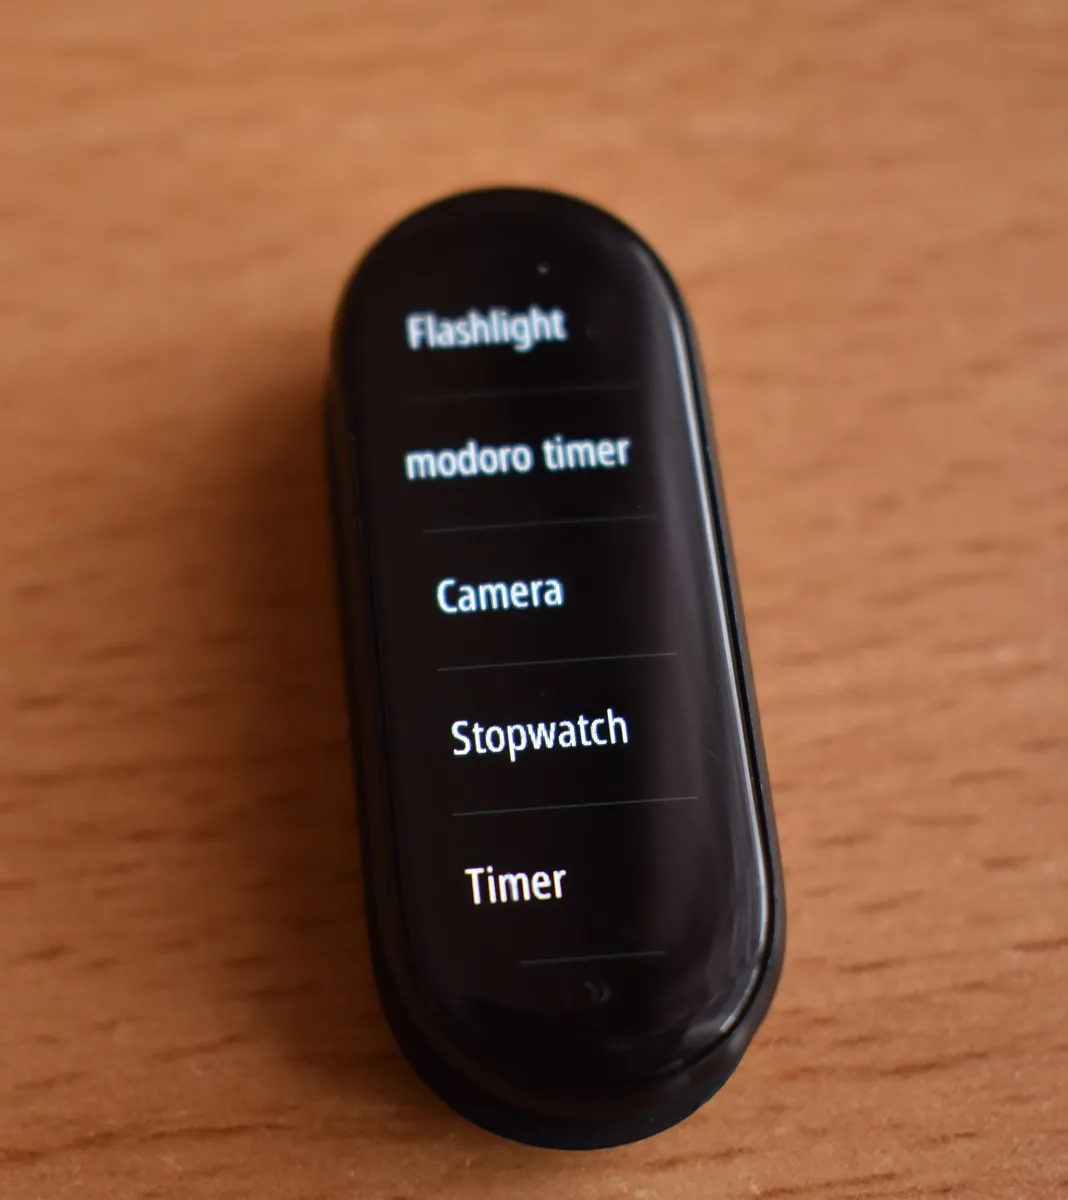 How to set up remote camera control on your Mi Band using Zepp Life app